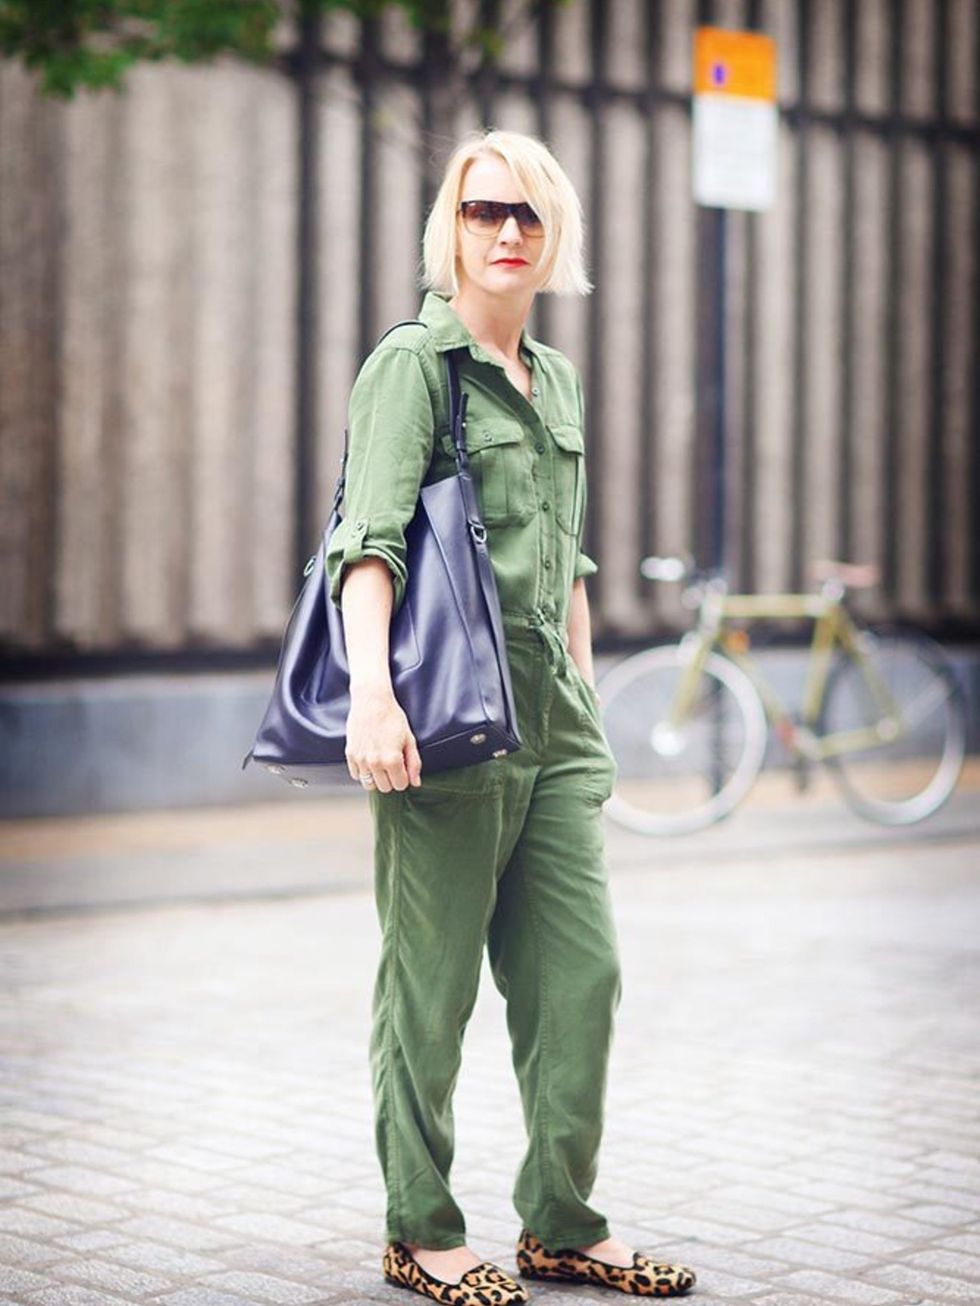 <p>Lorraine Candy, Editor-in-Chief</p>

<p><span style="line-height:1.6">Topshop boiler suit, AllSaints bag, Office shoes</span></p>